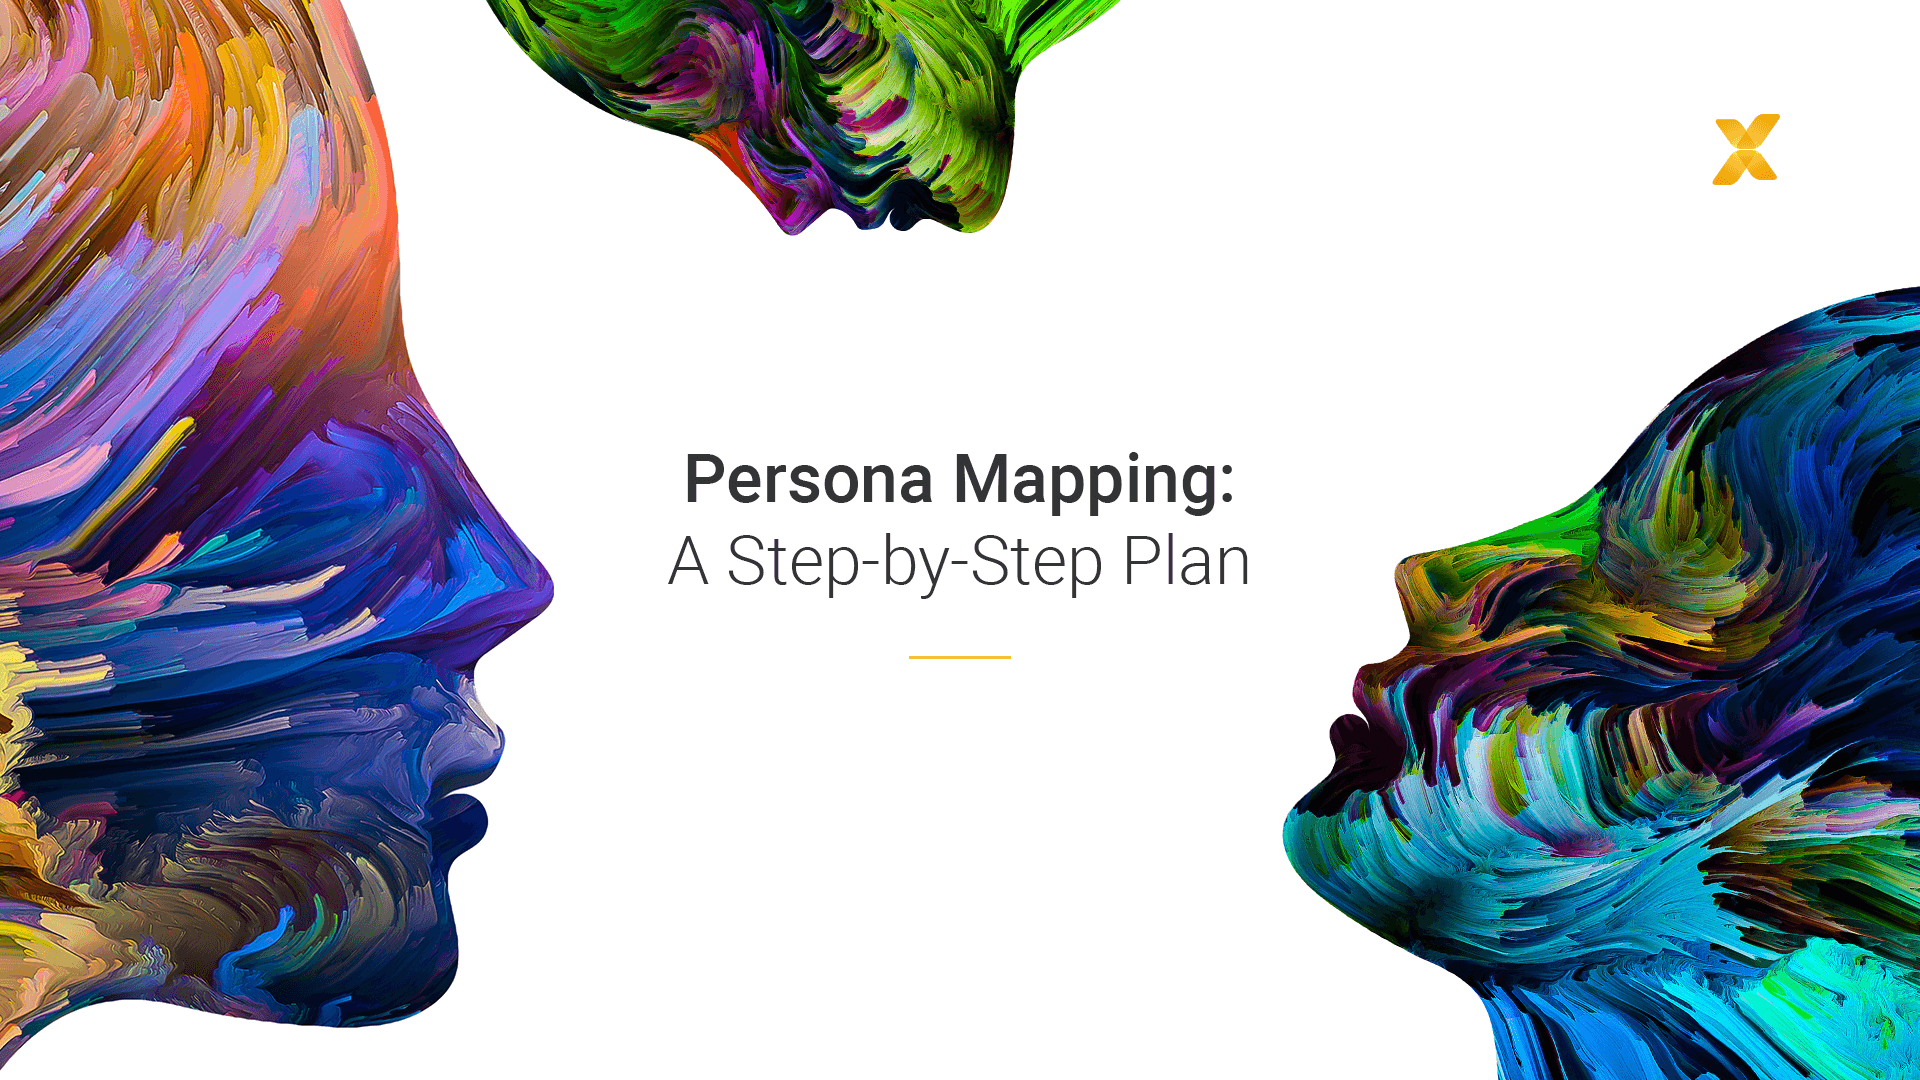 Persona Mapping